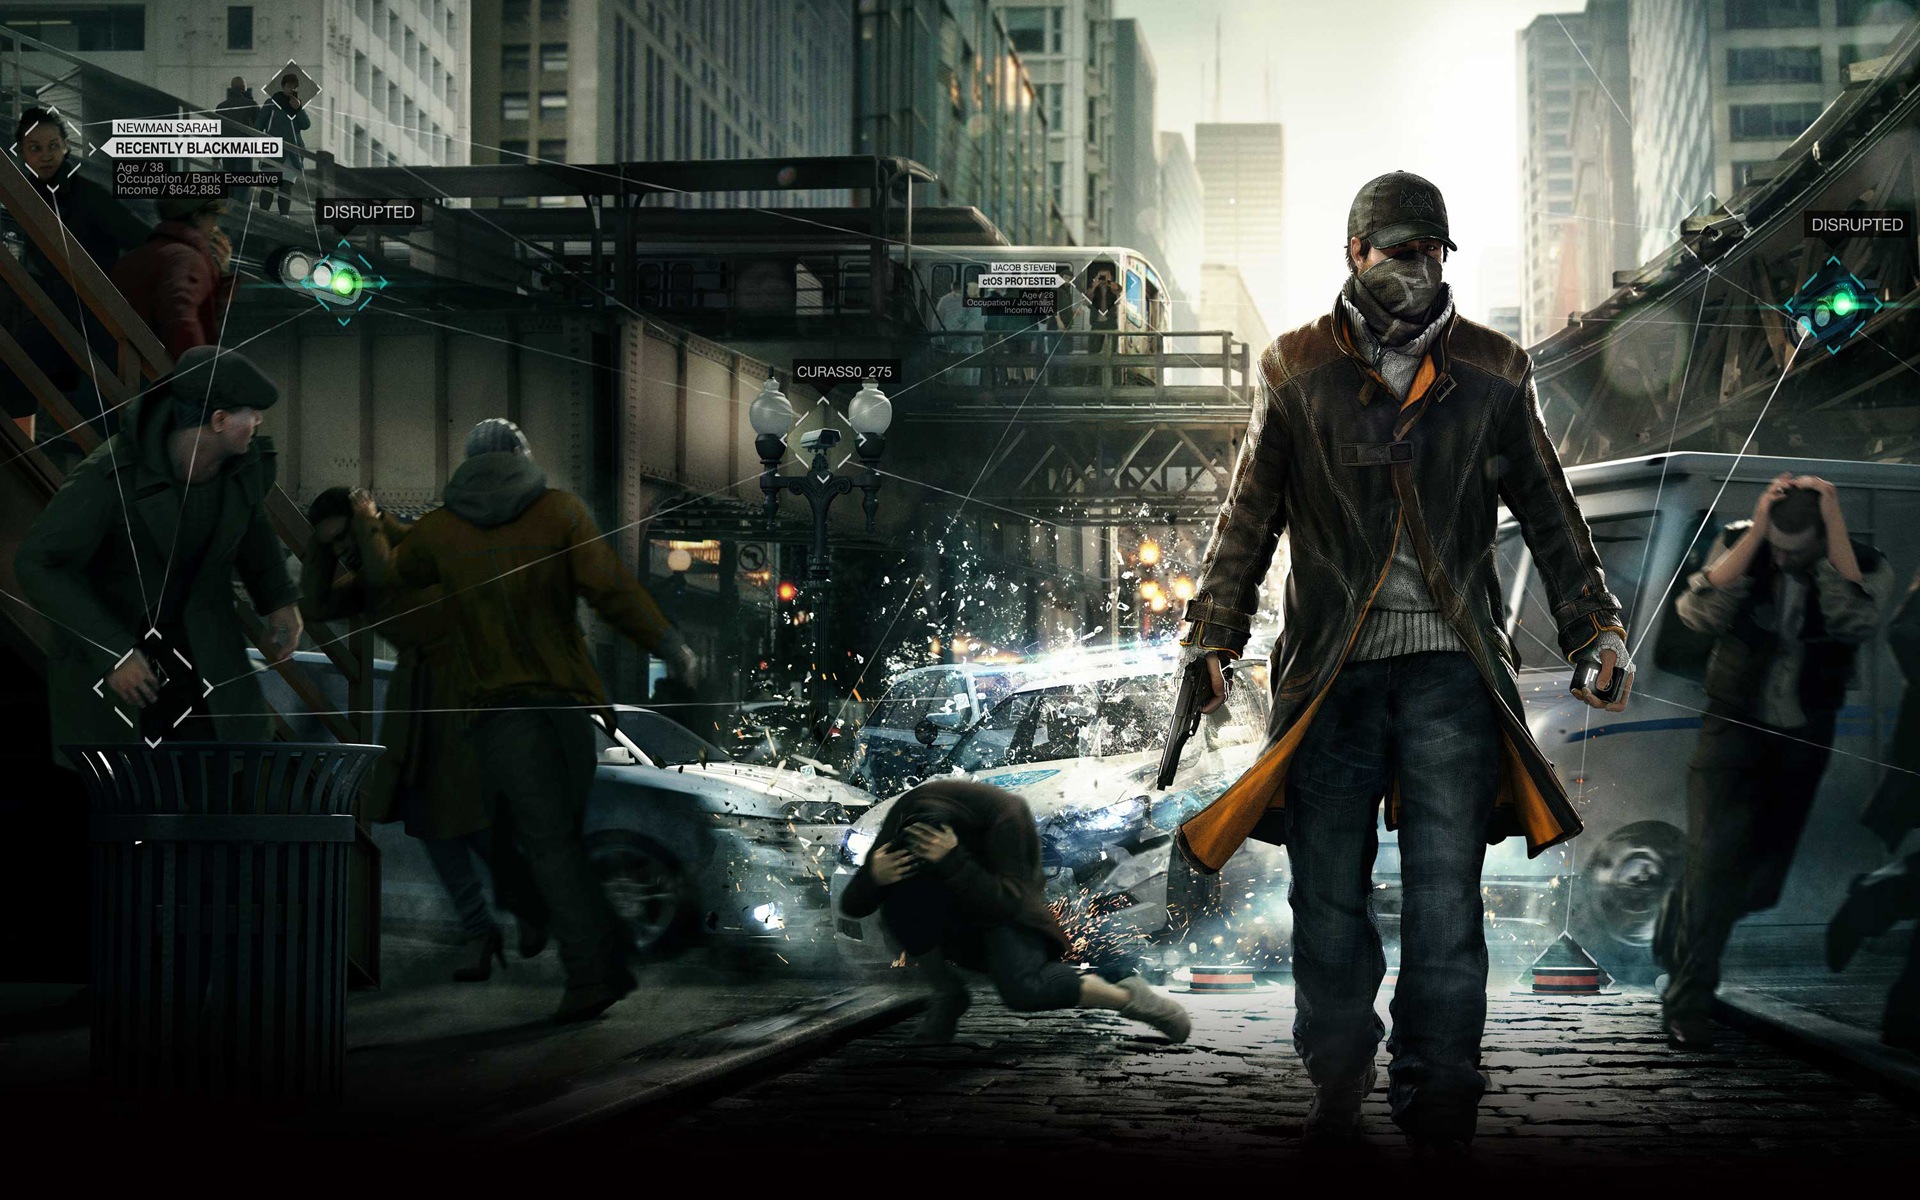 Watch Dogs 2013 juegos HD wallpapers #1 - 1920x1200